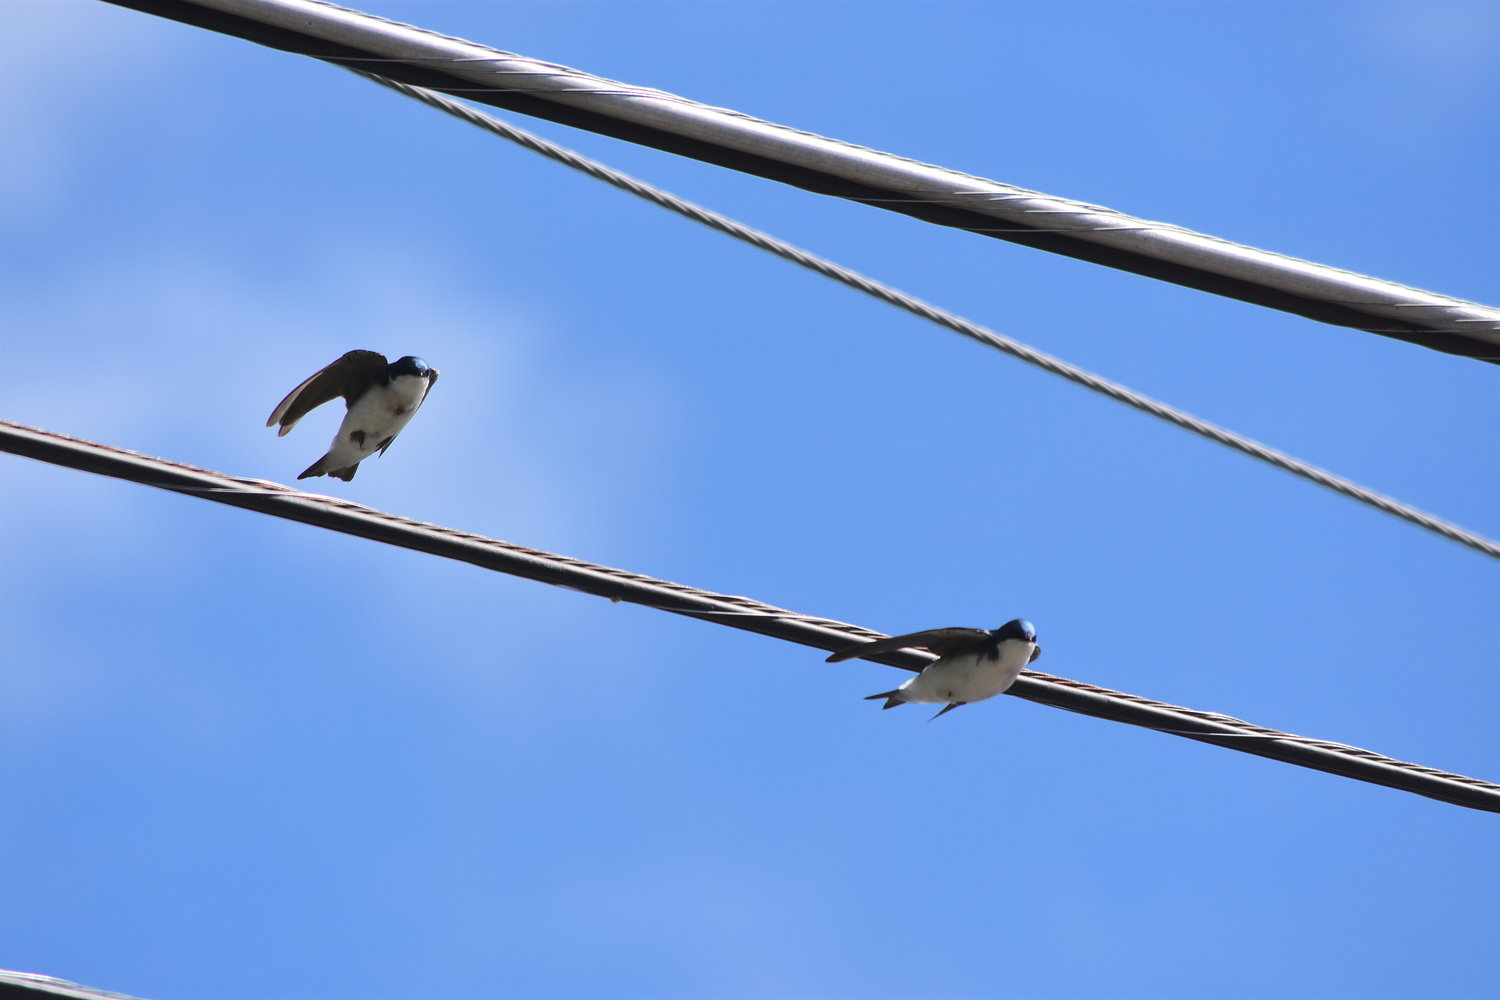 Two male tree swallows lift off from the power lines where they were perched overlooking Greeley Lake in Pike County, PA.